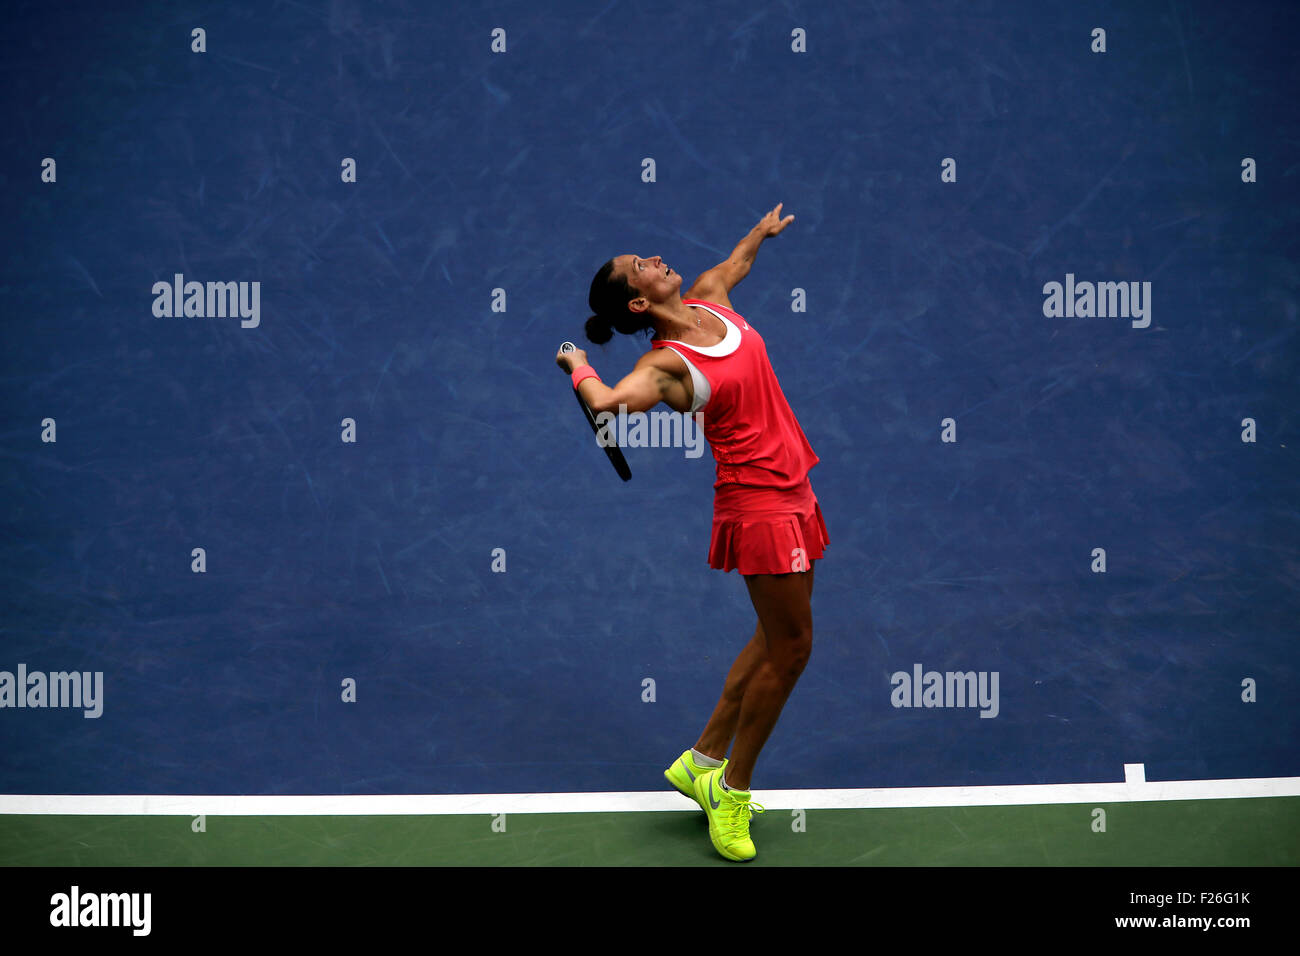 New York, USA. 12th Sep, 2015. Roberta Vinci of Italy serves to countrywoman Flavia Penetta during the women's final of the U.S. Open at Flushing Meadows, New York on the afternoon of September 12th, 2015.  Pennetta won the match 7-6 (7-4), 6-2 Credit:  Adam Stoltman/Alamy Live News Stock Photo